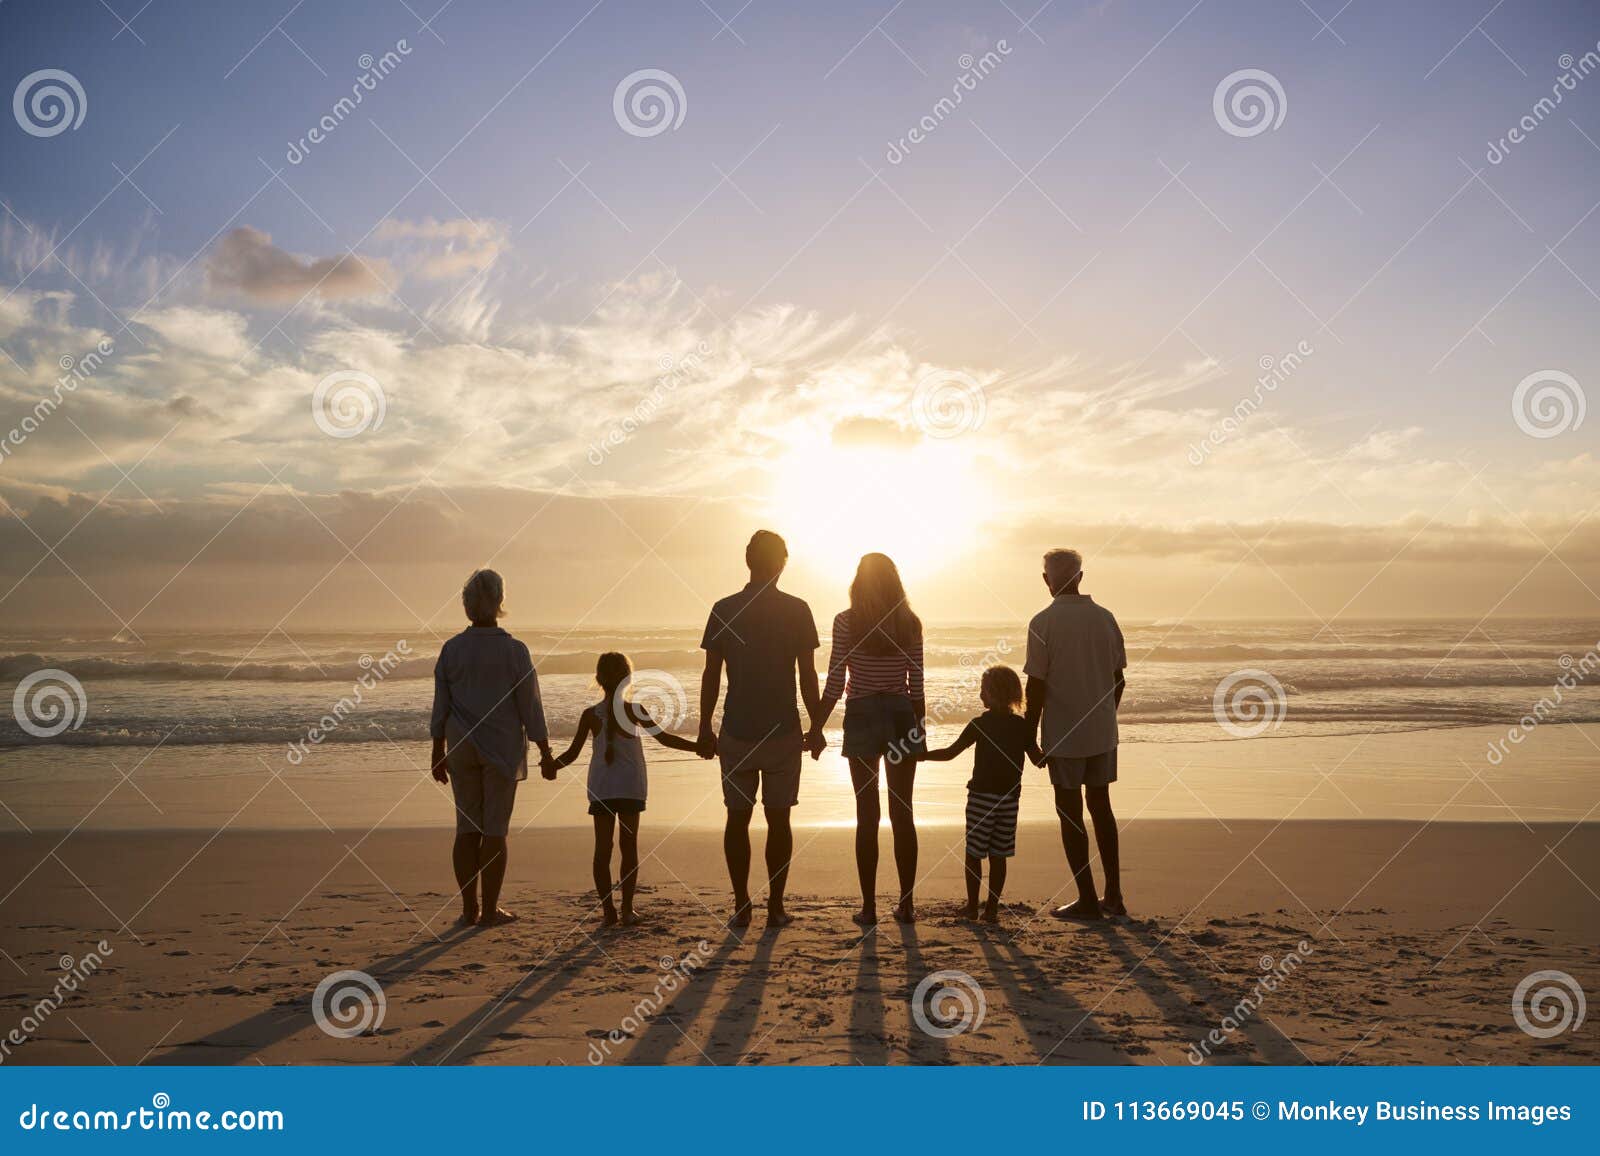 rear view of multi generation family silhouetted on beach